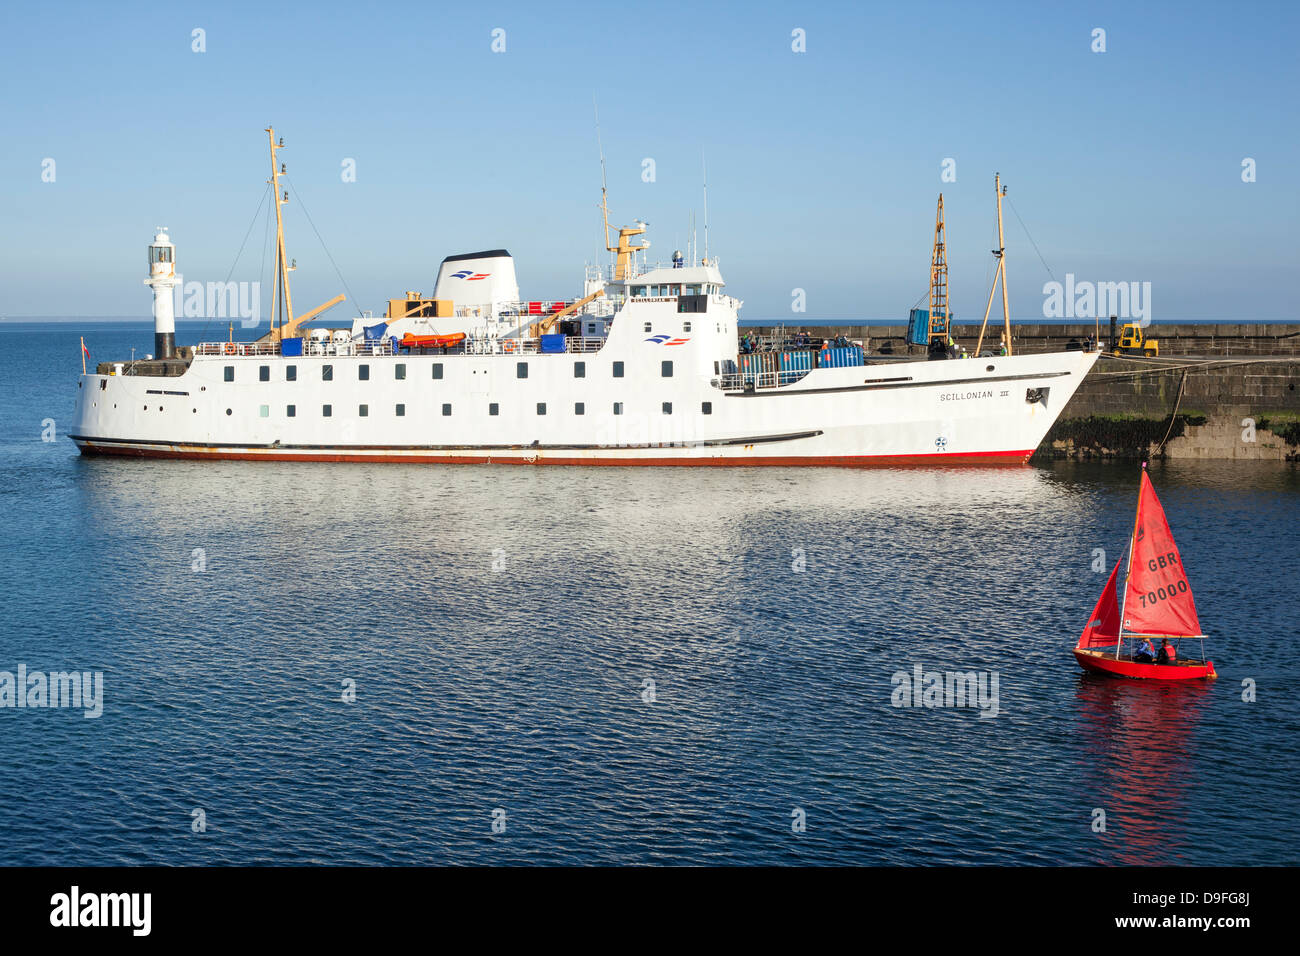 Scillonian III, the Isles of Scilly ferry, in Penzance harbour, Cornwall England. Stock Photo